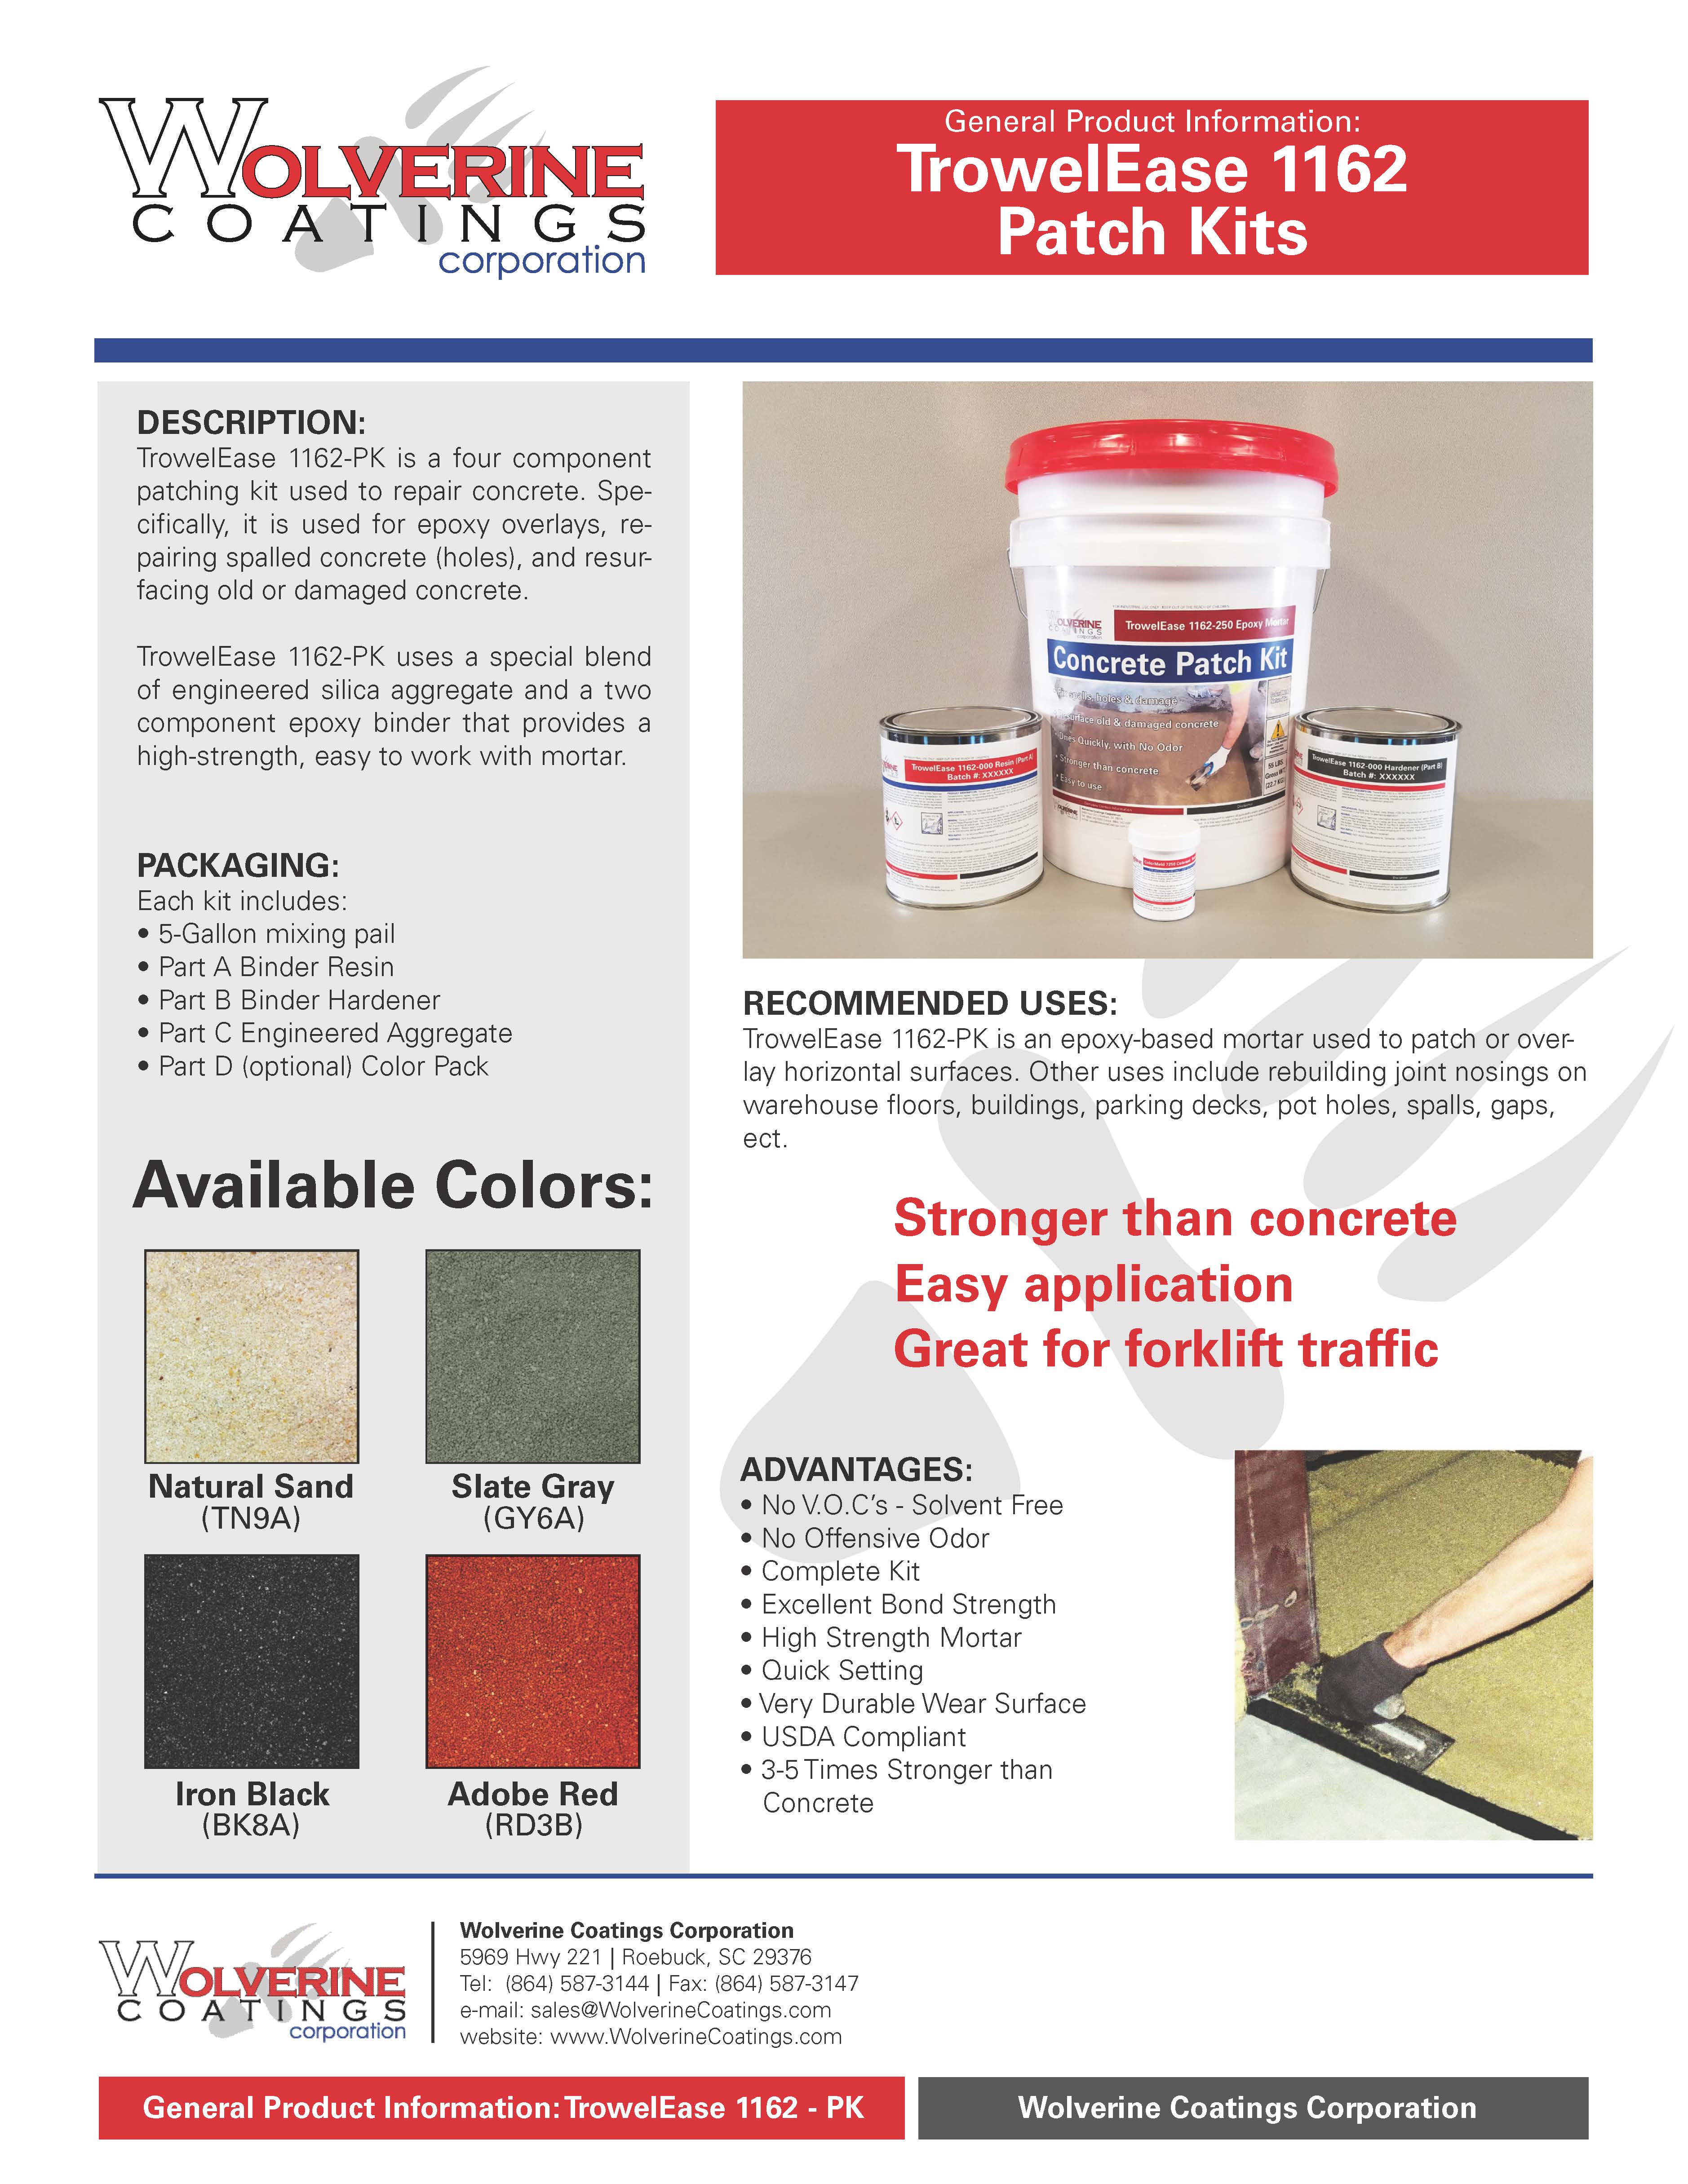 Patch Kits - General Product Information - Wolverine Coatings Corporation: Coatings Manufacturer, Spartanburg, SC